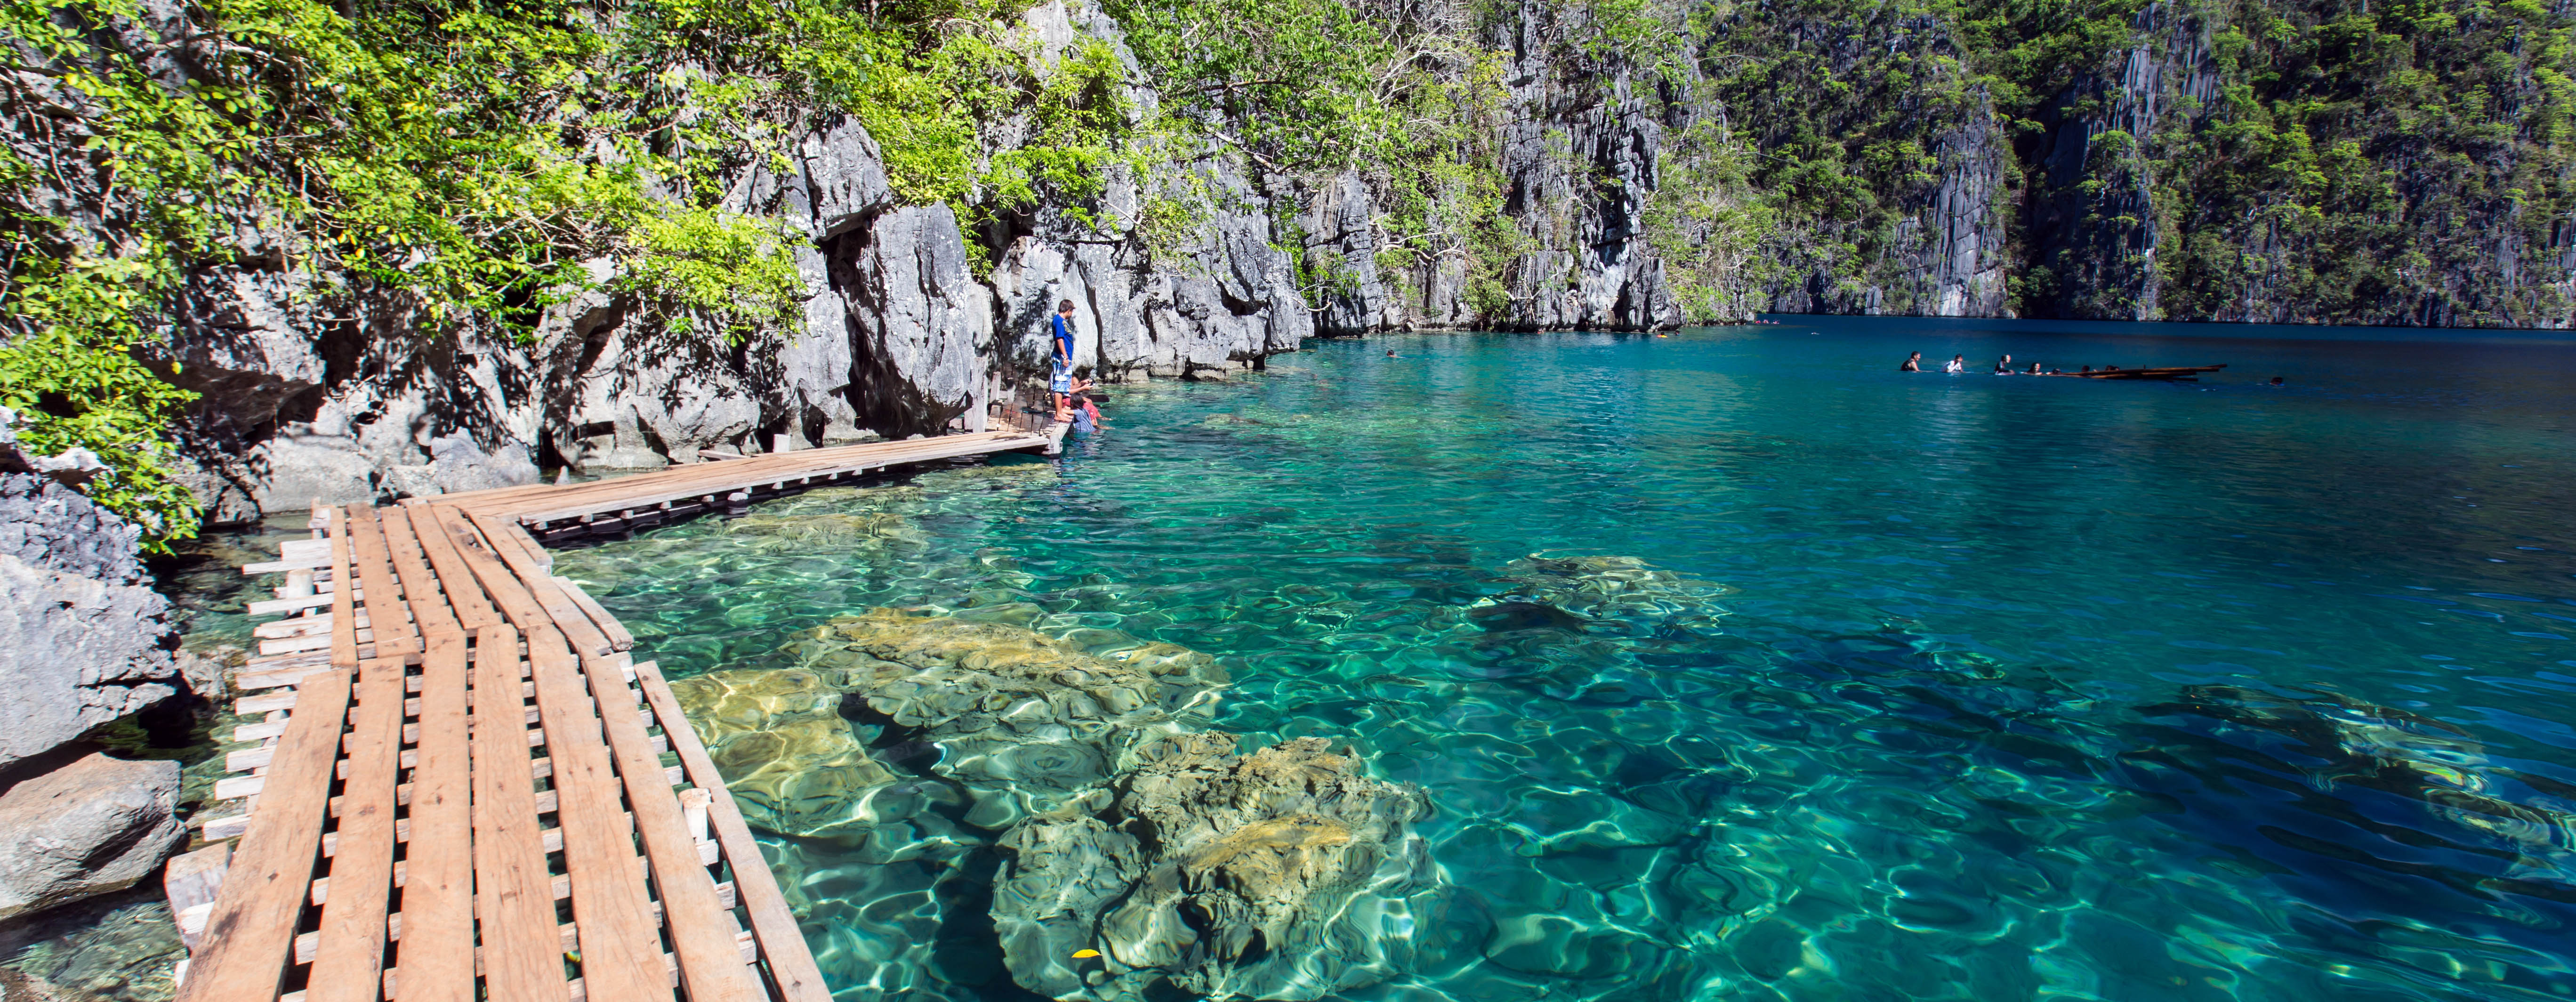 palawan day tour package